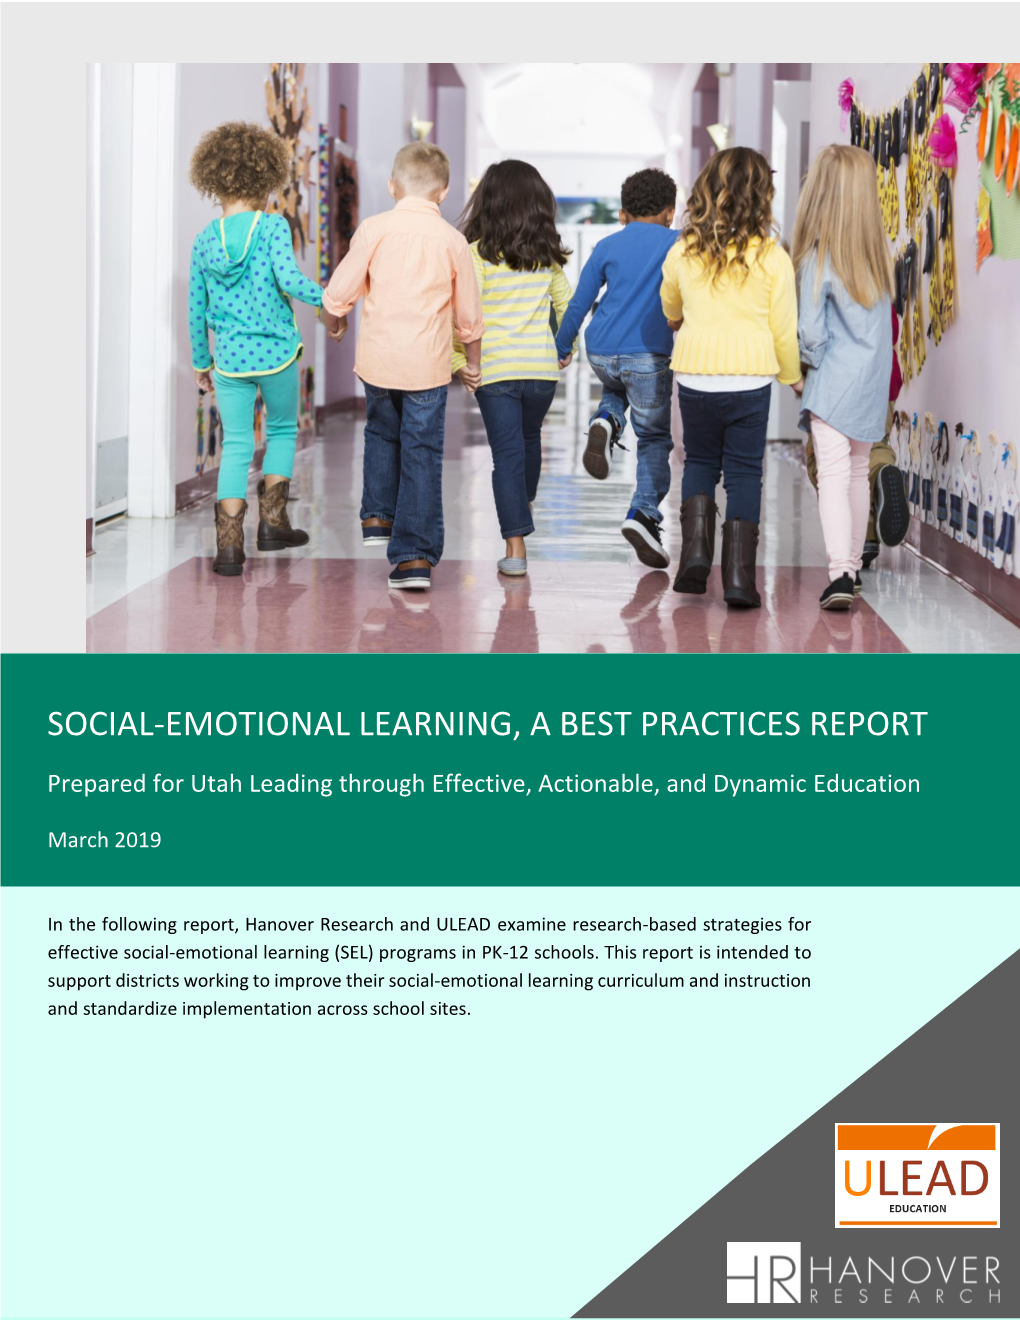 SOCIAL-EMOTIONAL LEARNING, a BEST PRACTICES REPORT Prepared for Utah Leading Through Effective, Actionable, and Dynamic Education